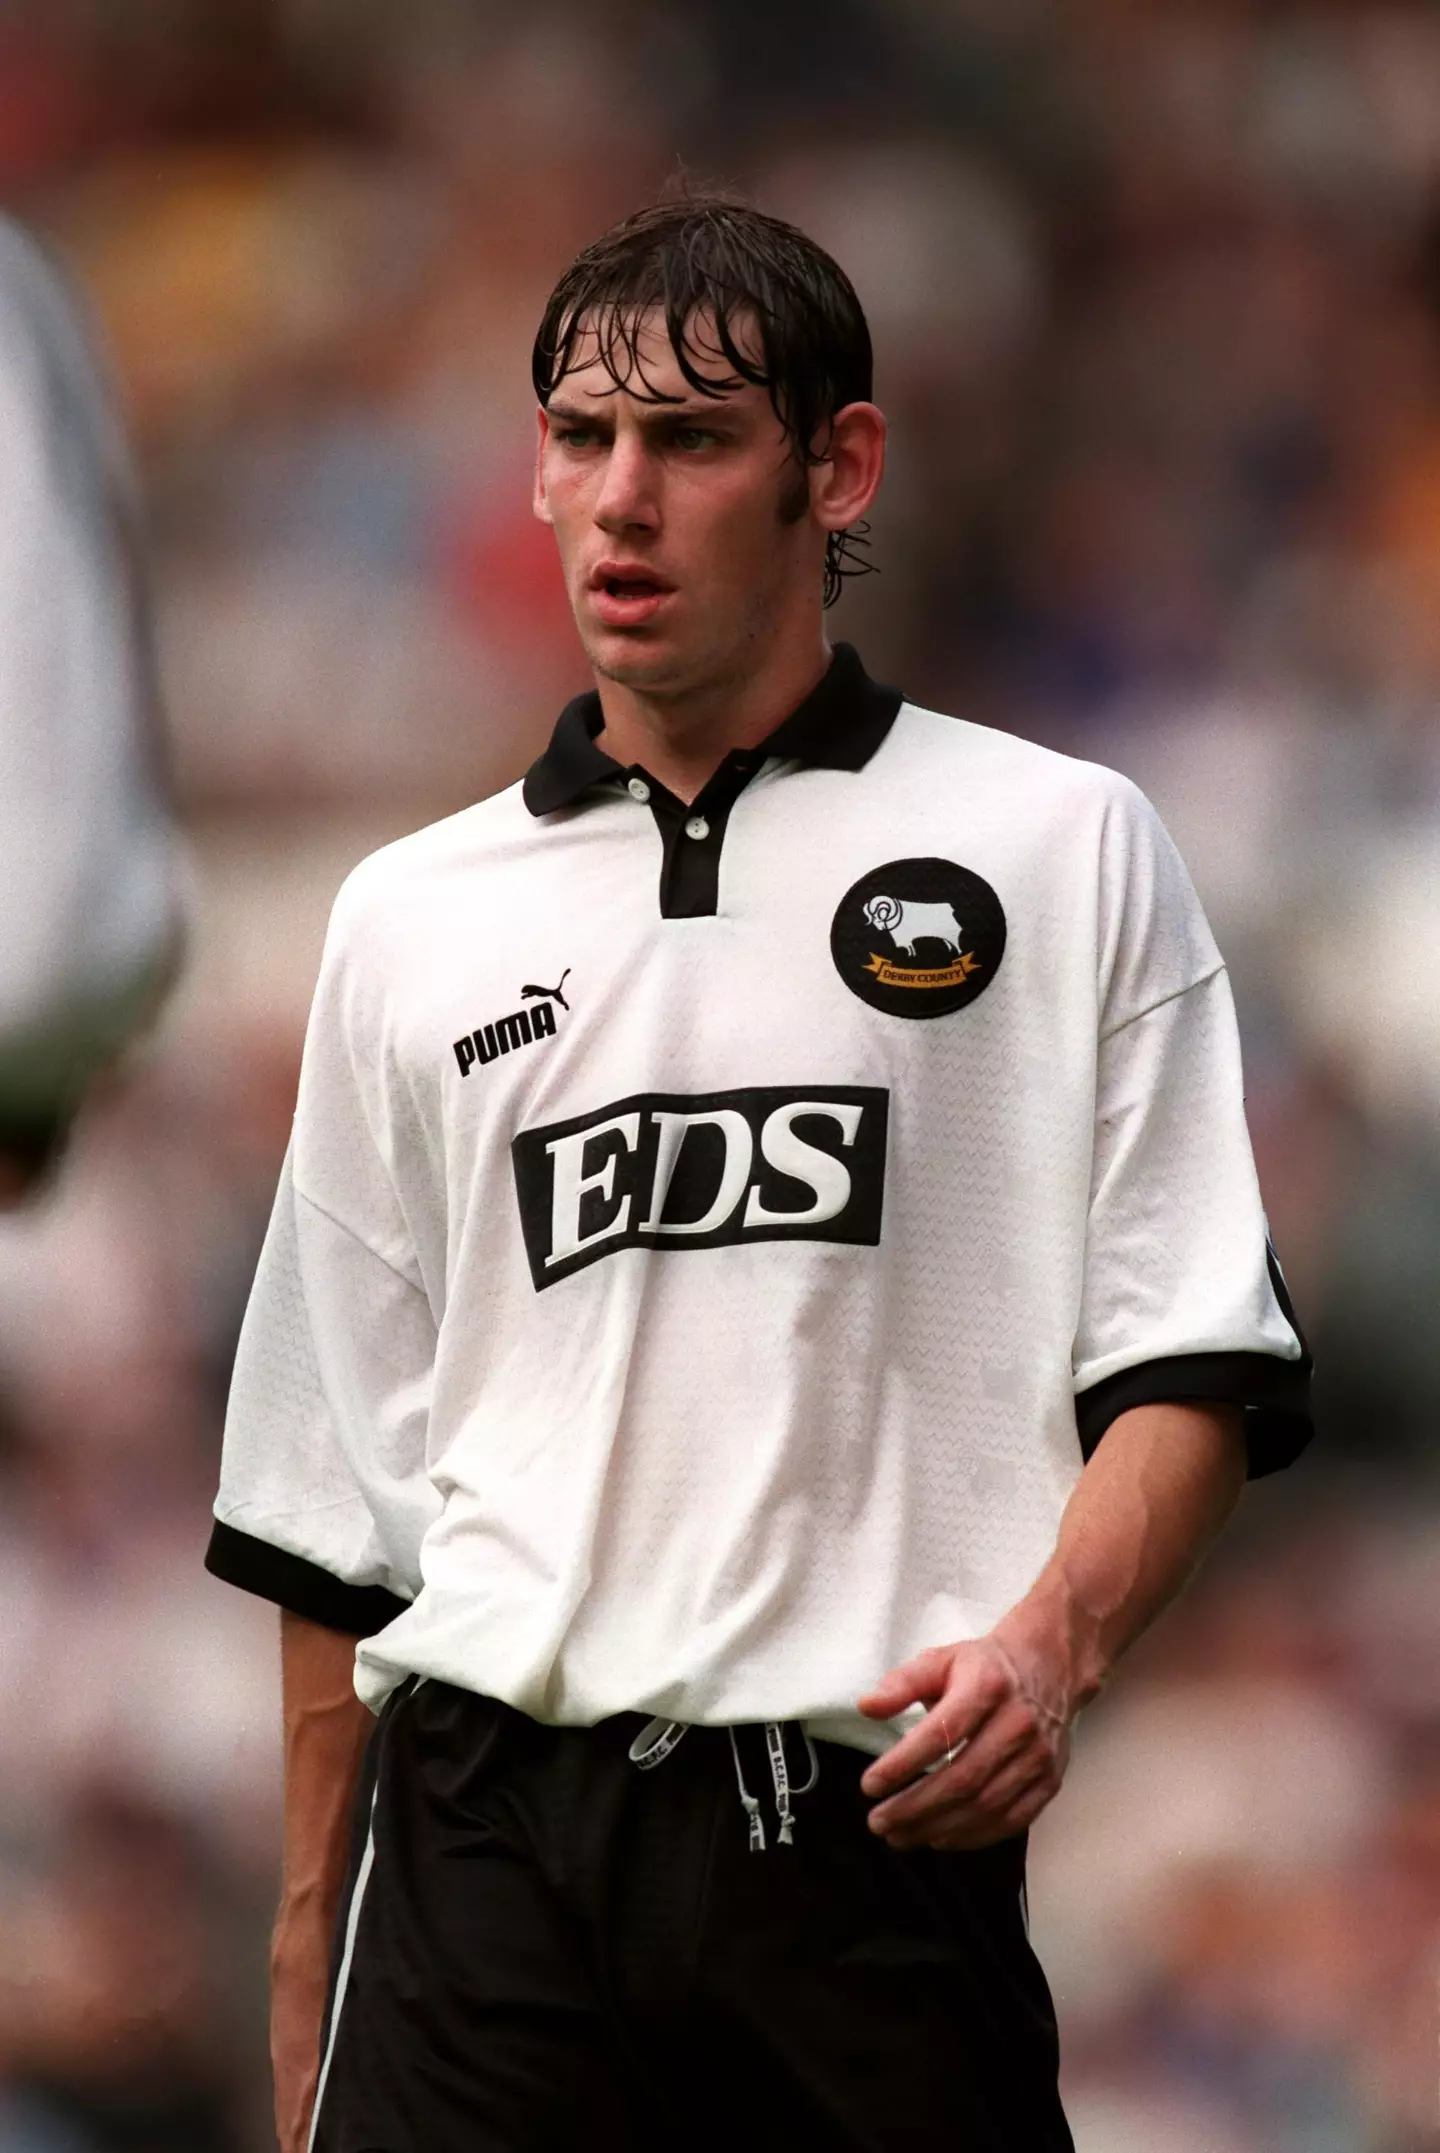 Rory Delap at Derby County. (Image